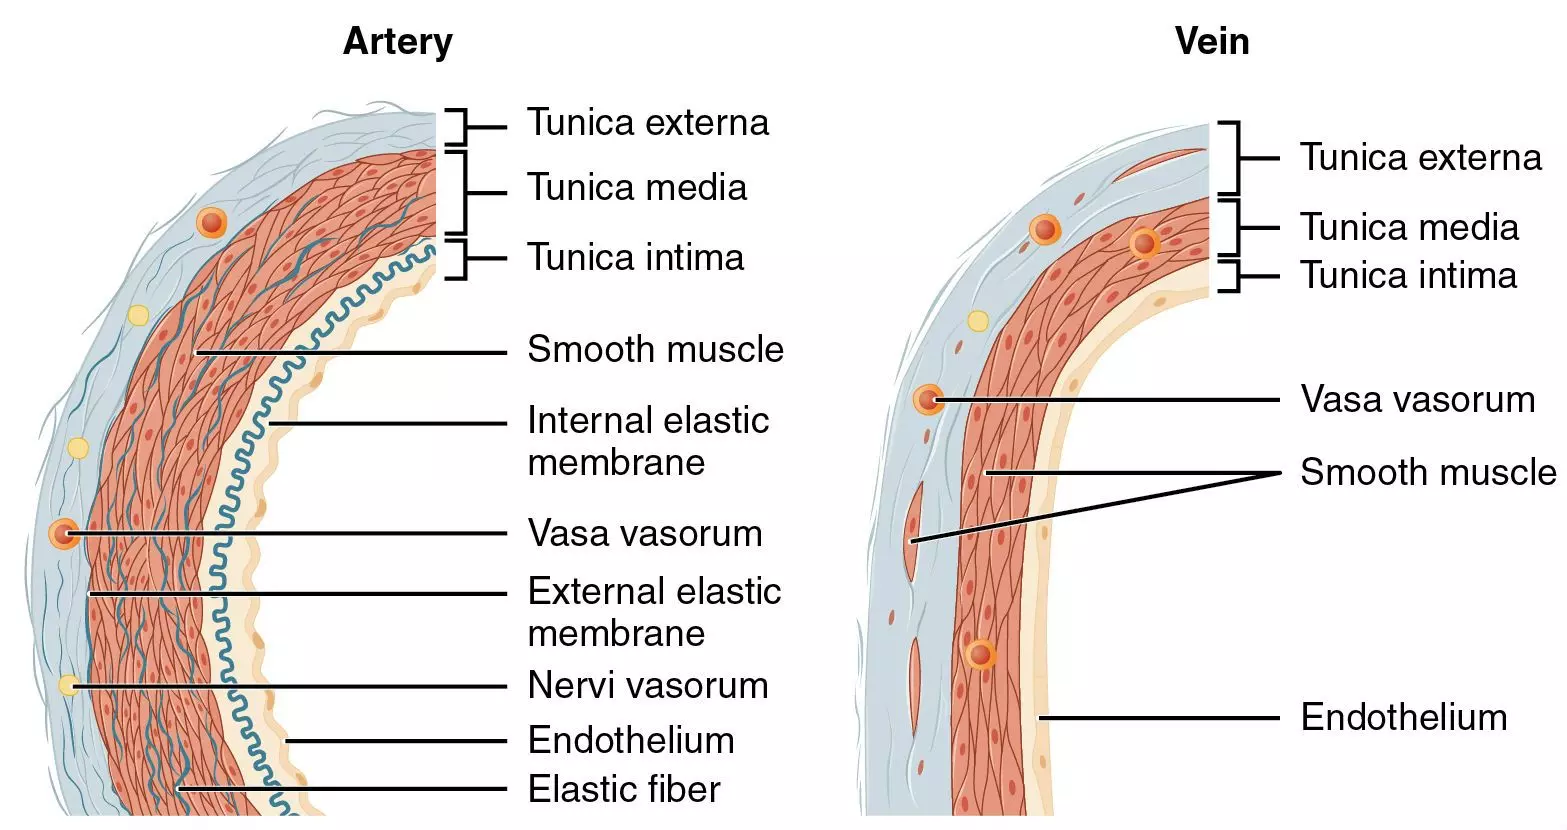 Artery and Vein vessel wall structure SimpleMed